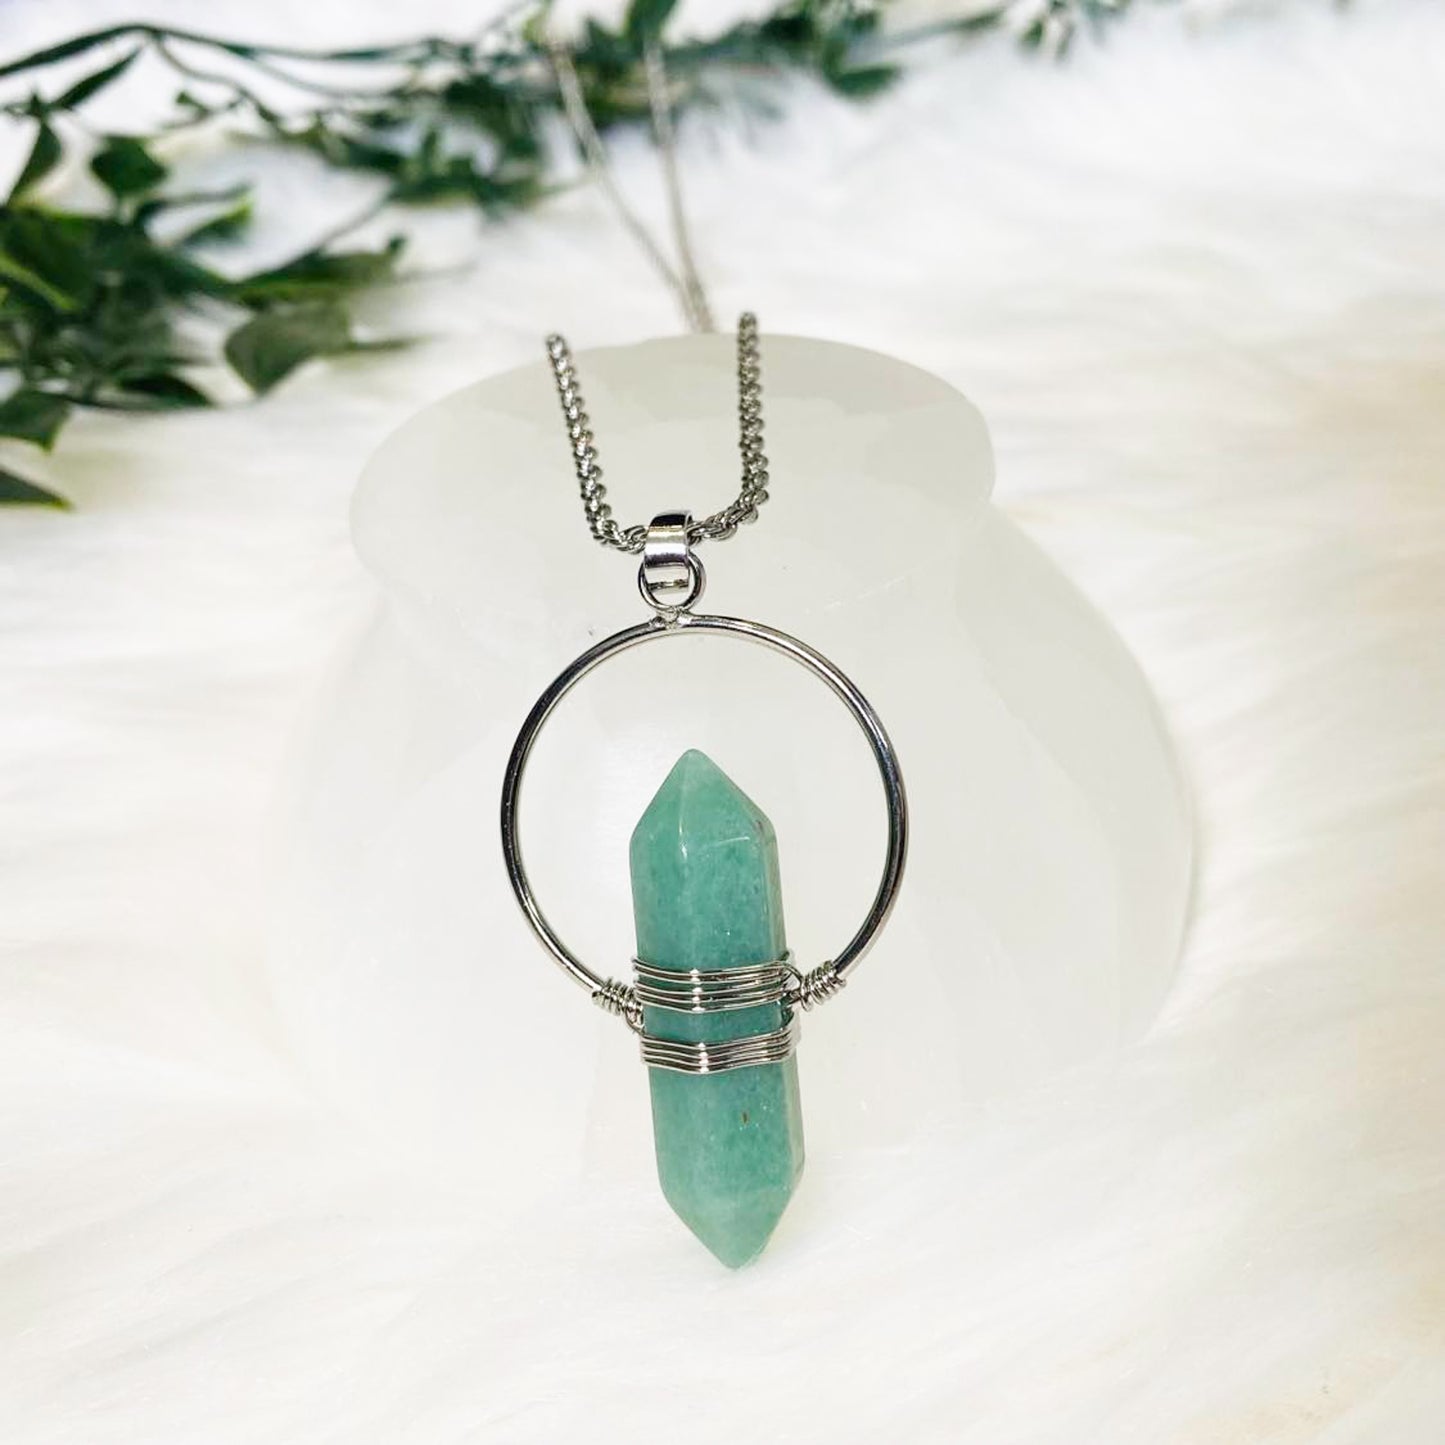 Green Aventurine Necklace with Gold Dipped Silver Chain